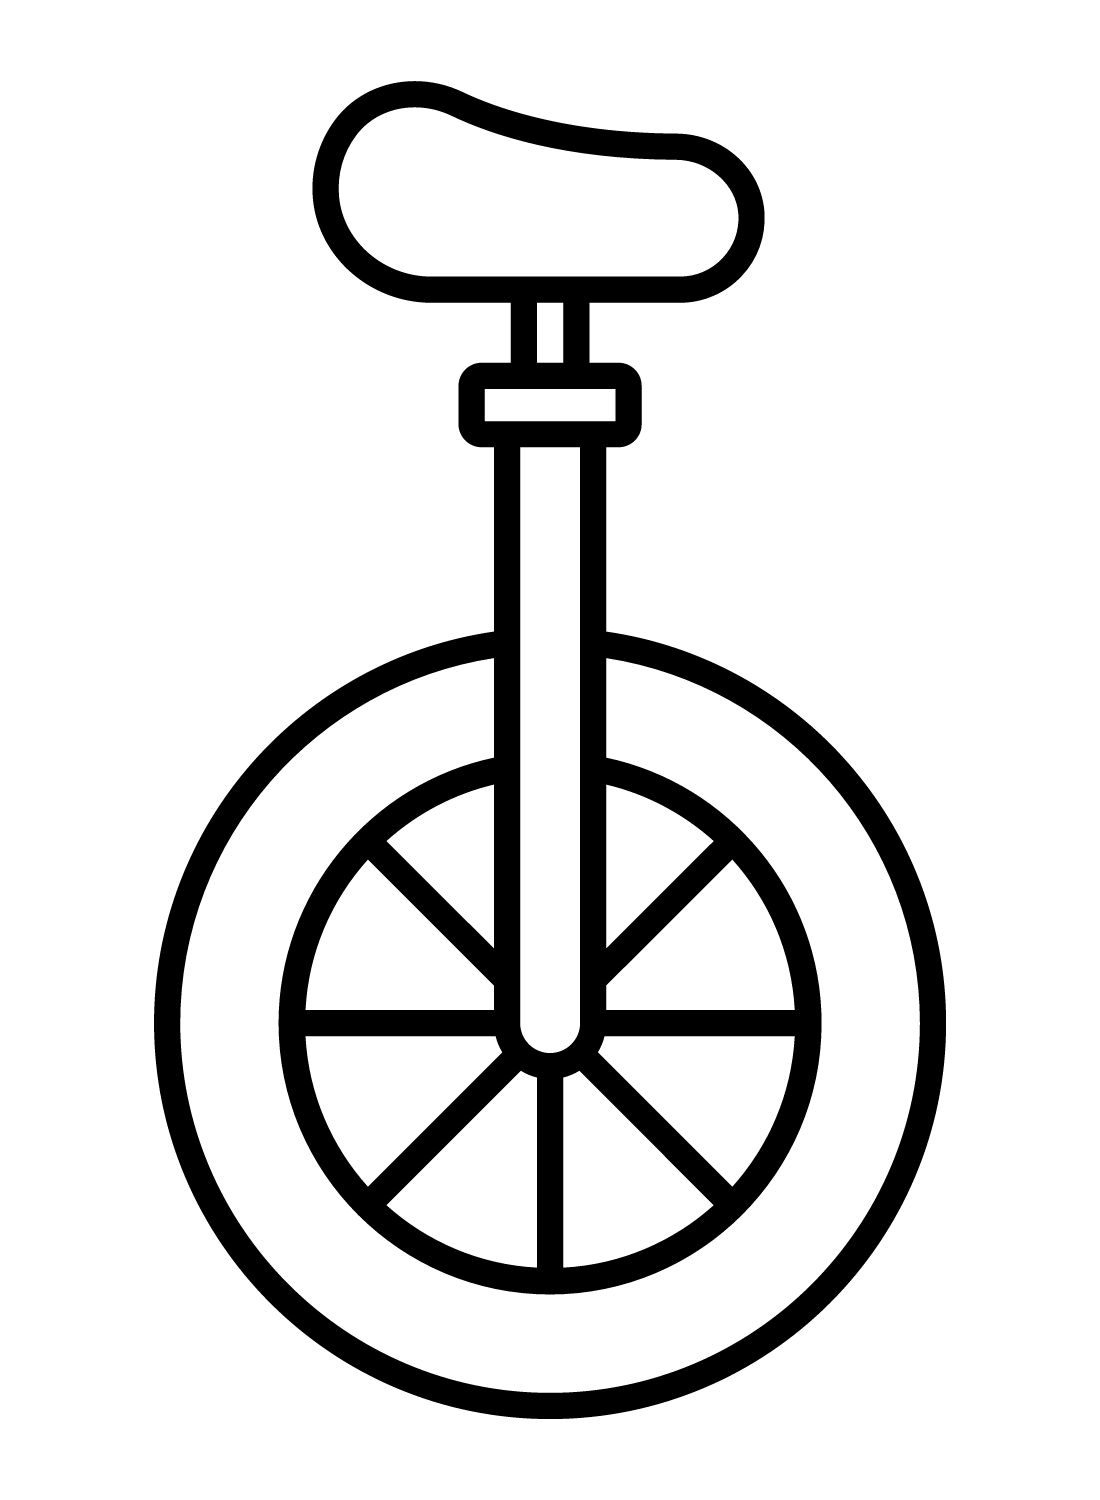 Unicycle coloring pages